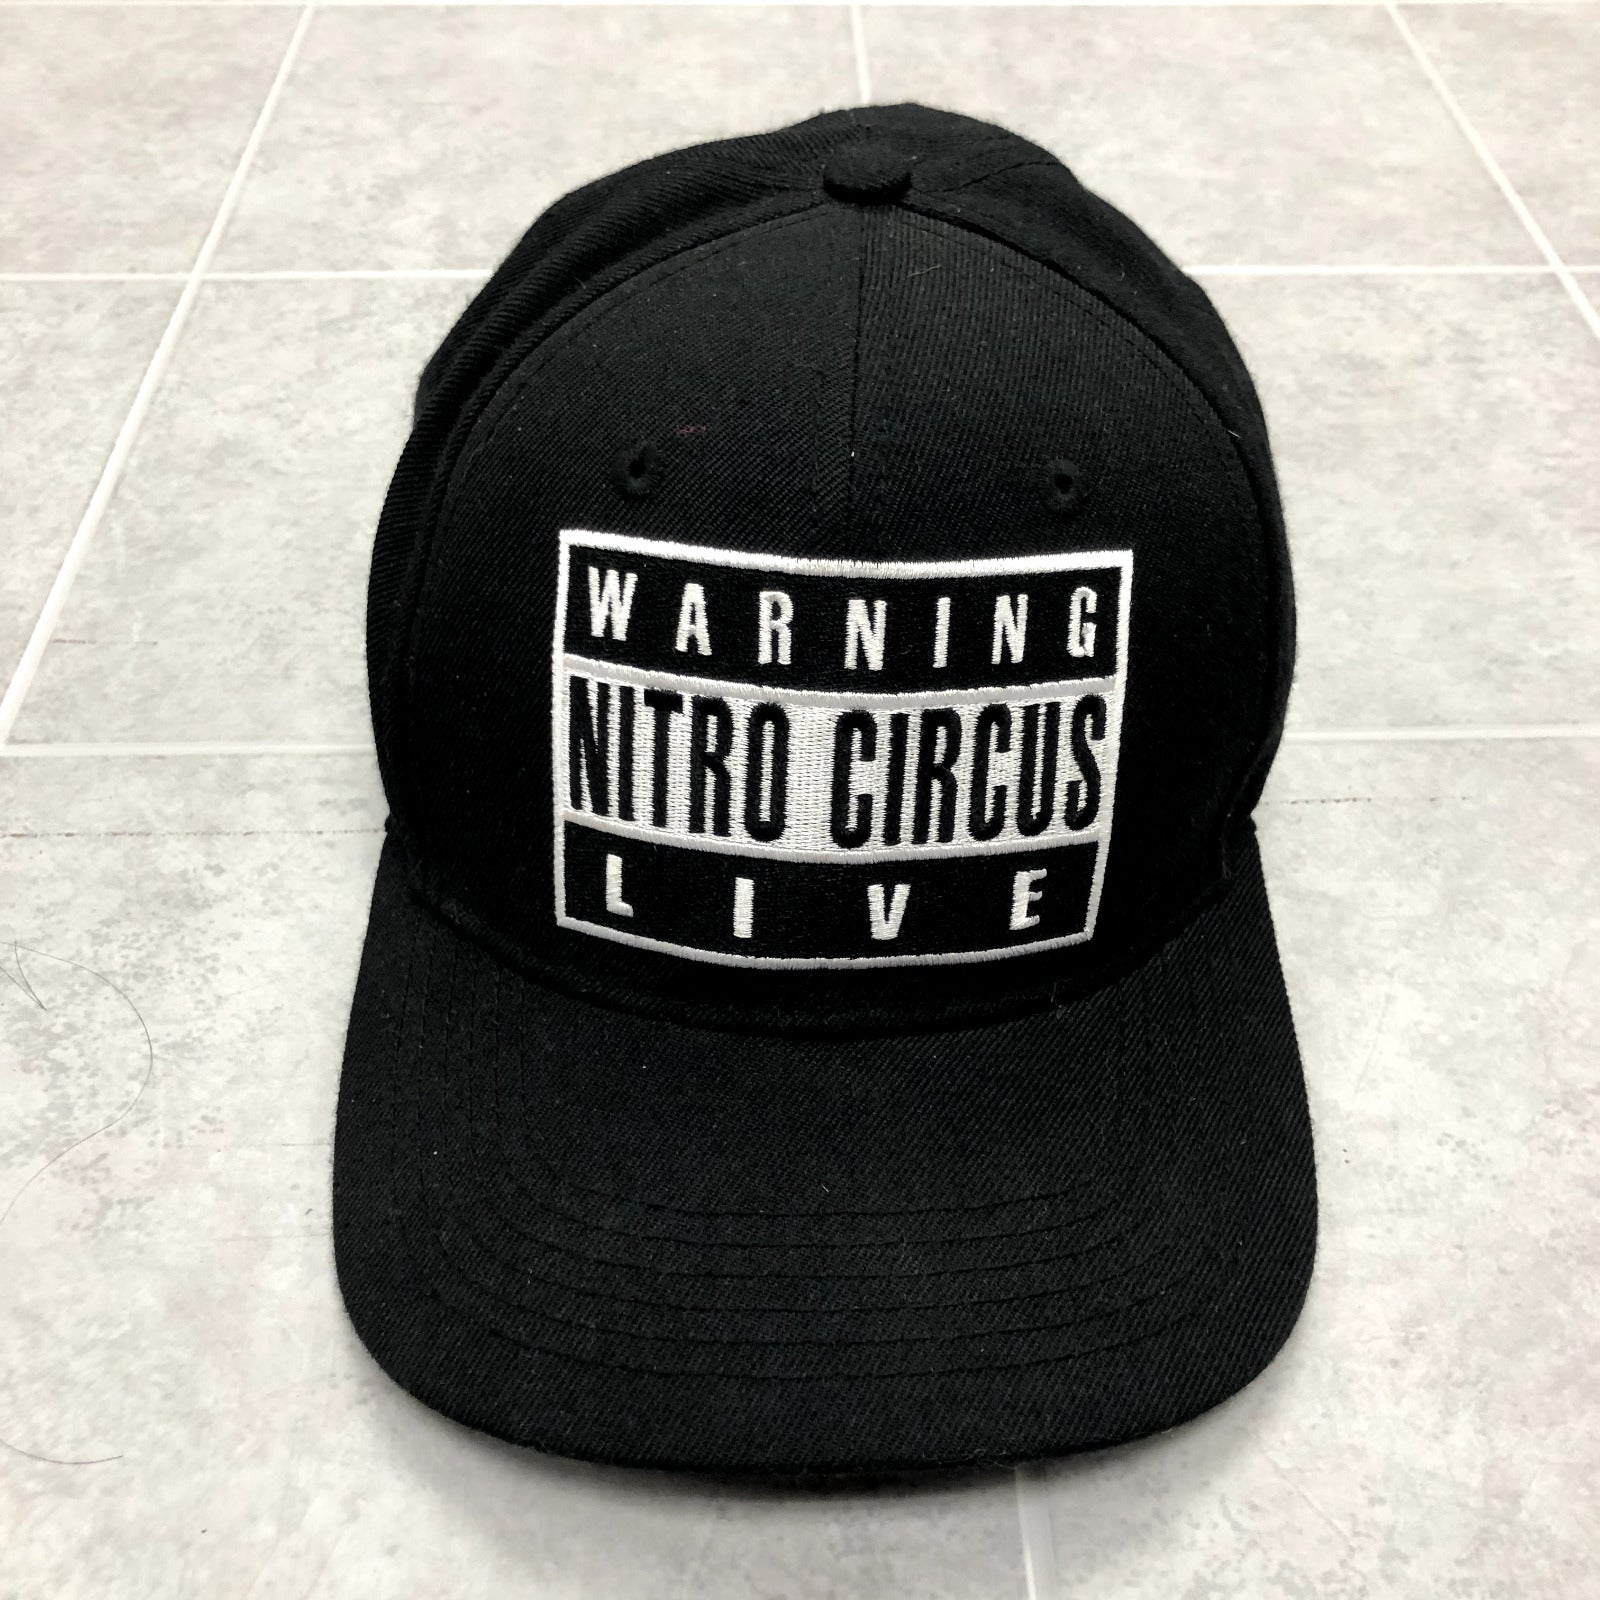 Black Snap Back Graphic Nitro Circus Live Baseball Cap Hat Adult One Size